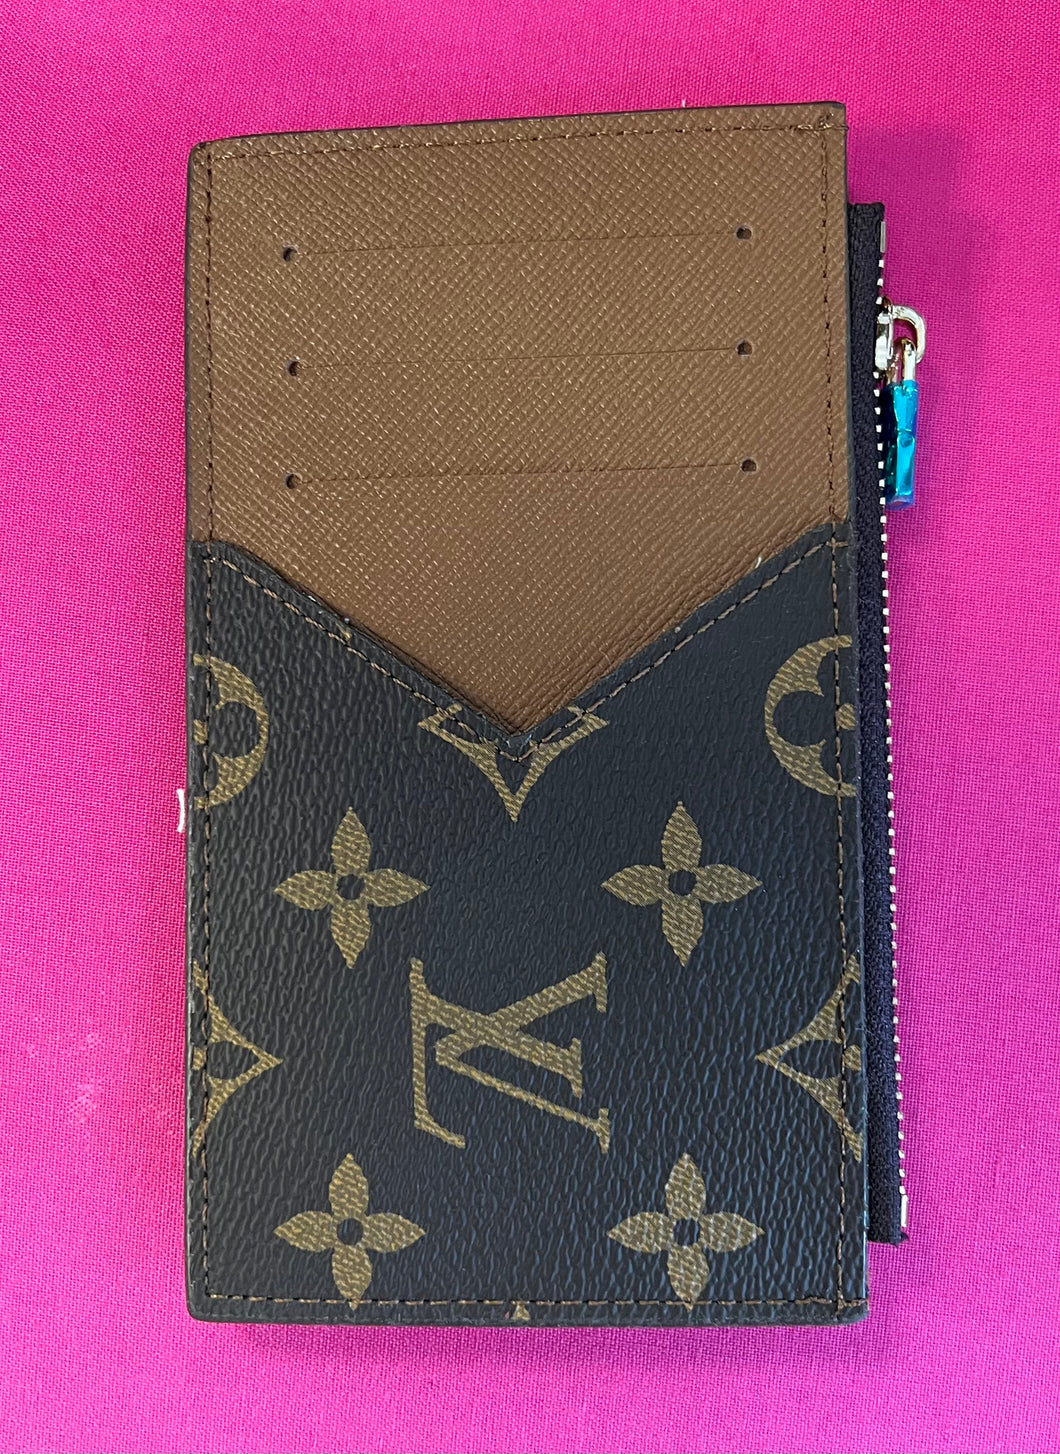 Fashion leather card wallet compact - Sassy Shelby's